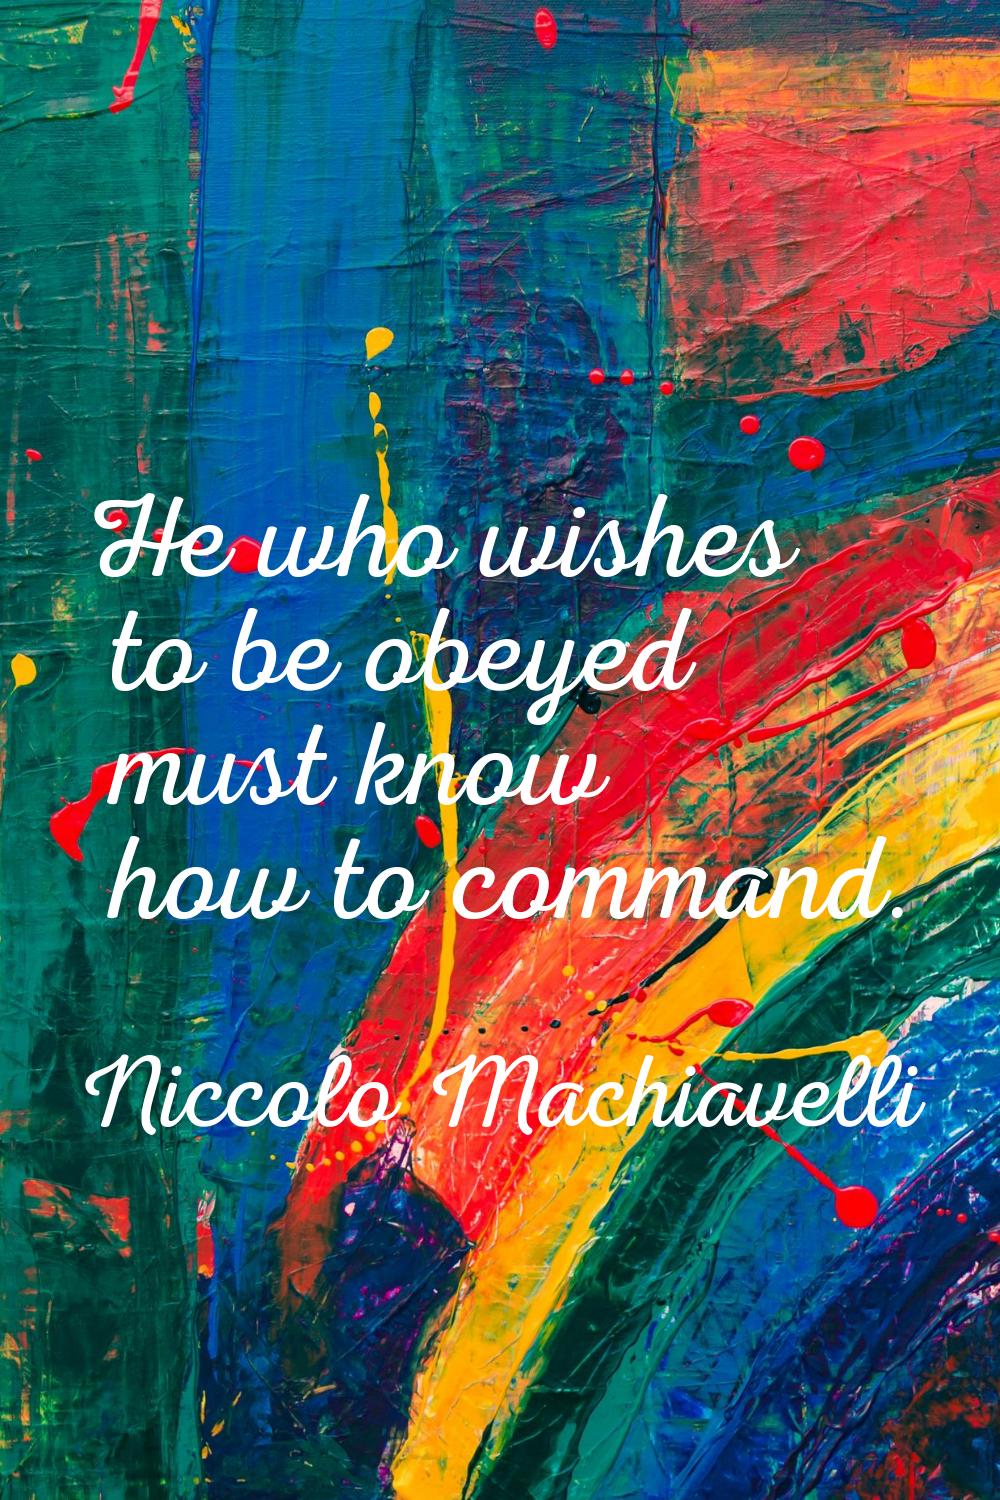 He who wishes to be obeyed must know how to command.